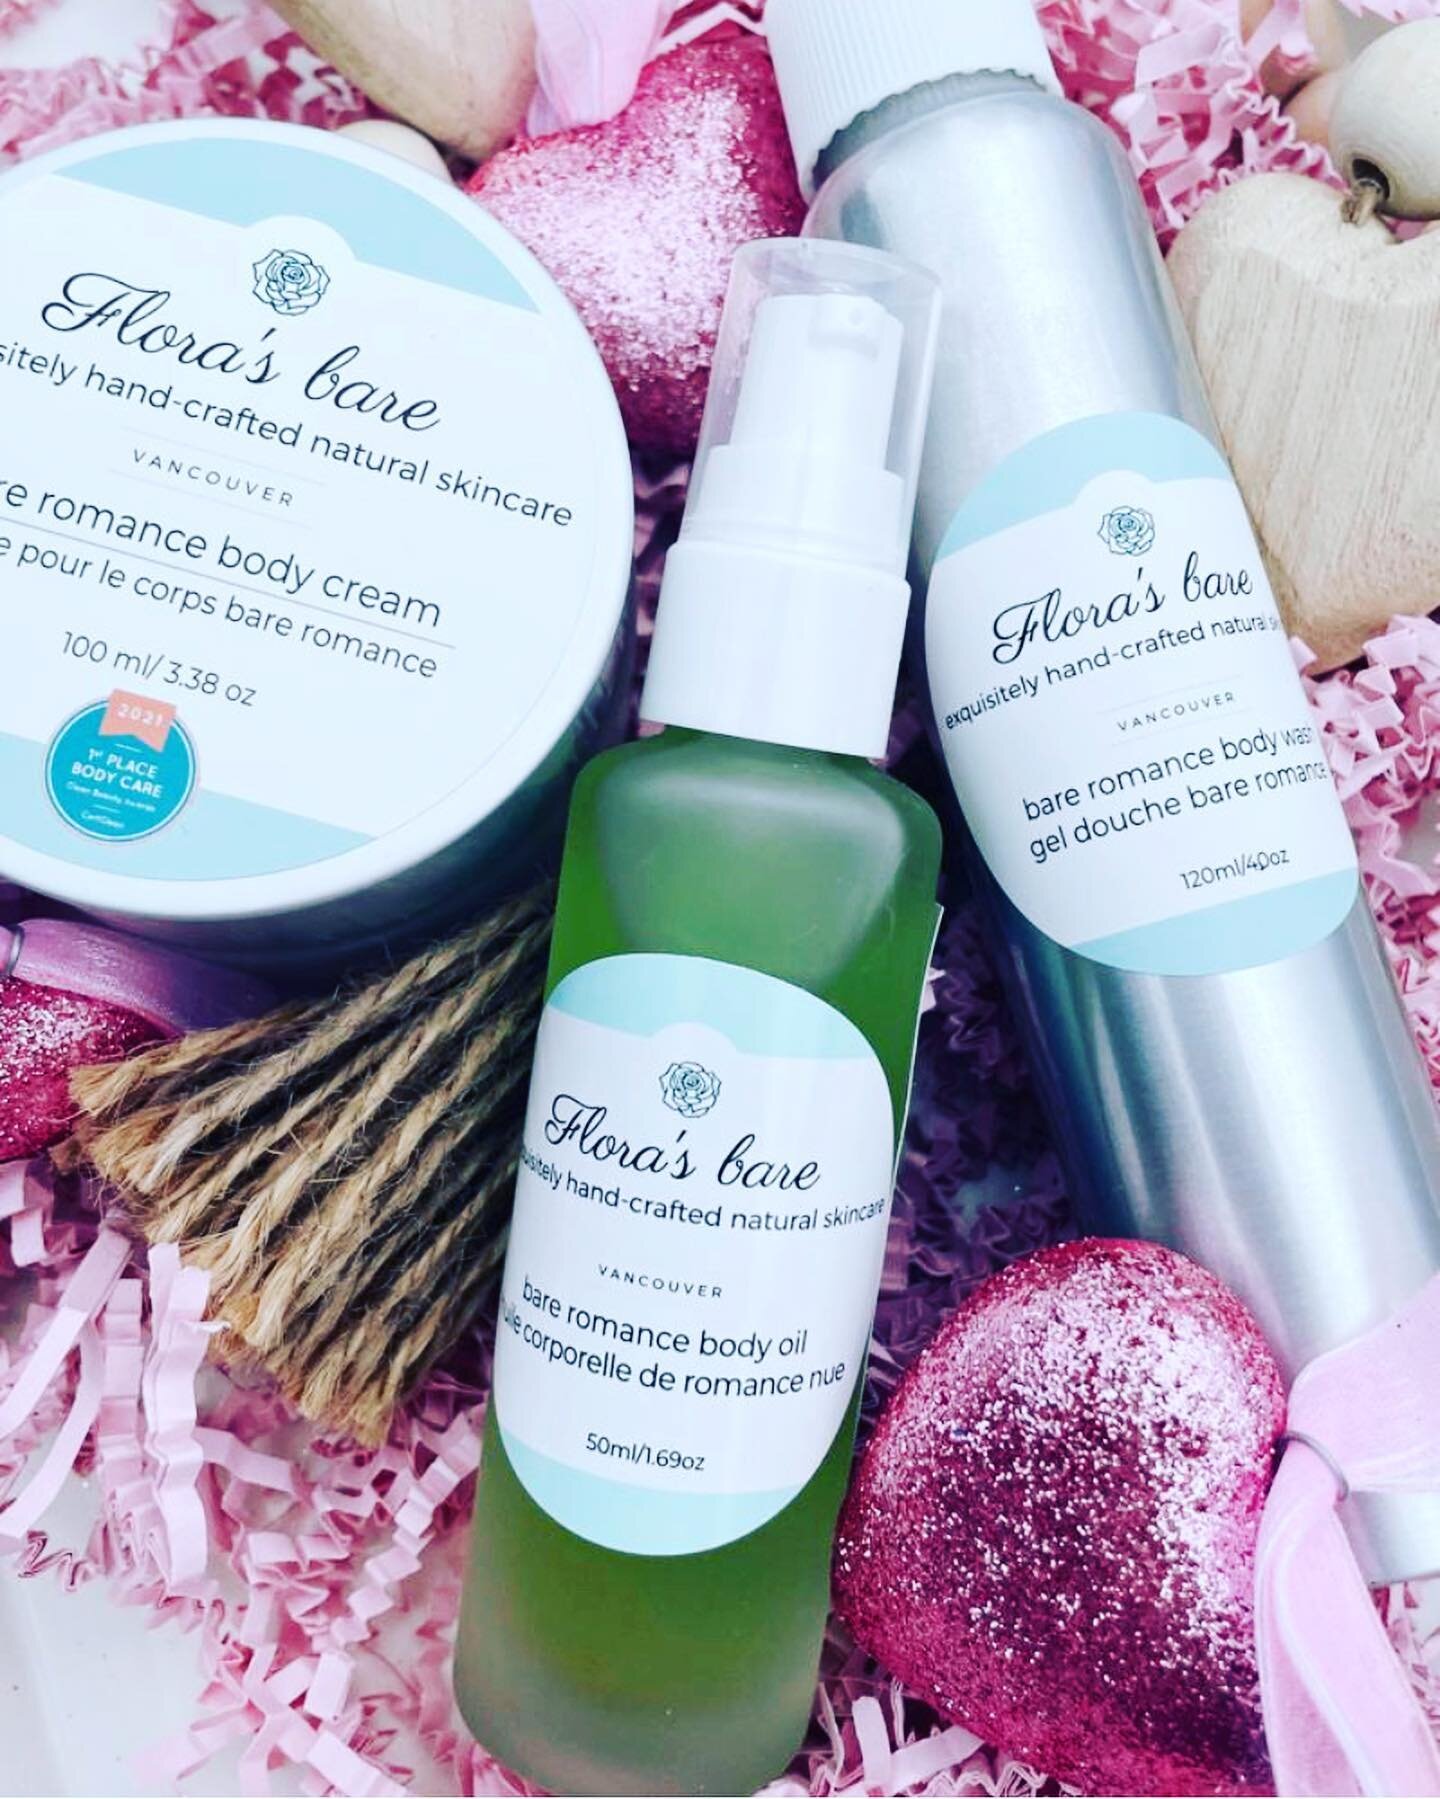 Romance is in the air at Flora&rsquo;s bare💕💕💕💕💕
Not only do we have an entire body line named &lsquo;bare romance&rsquo;😍😍😍, incorporating the romantic combination of rose and geranium, laced with warm spicy notes of sandalwood and vanilla w